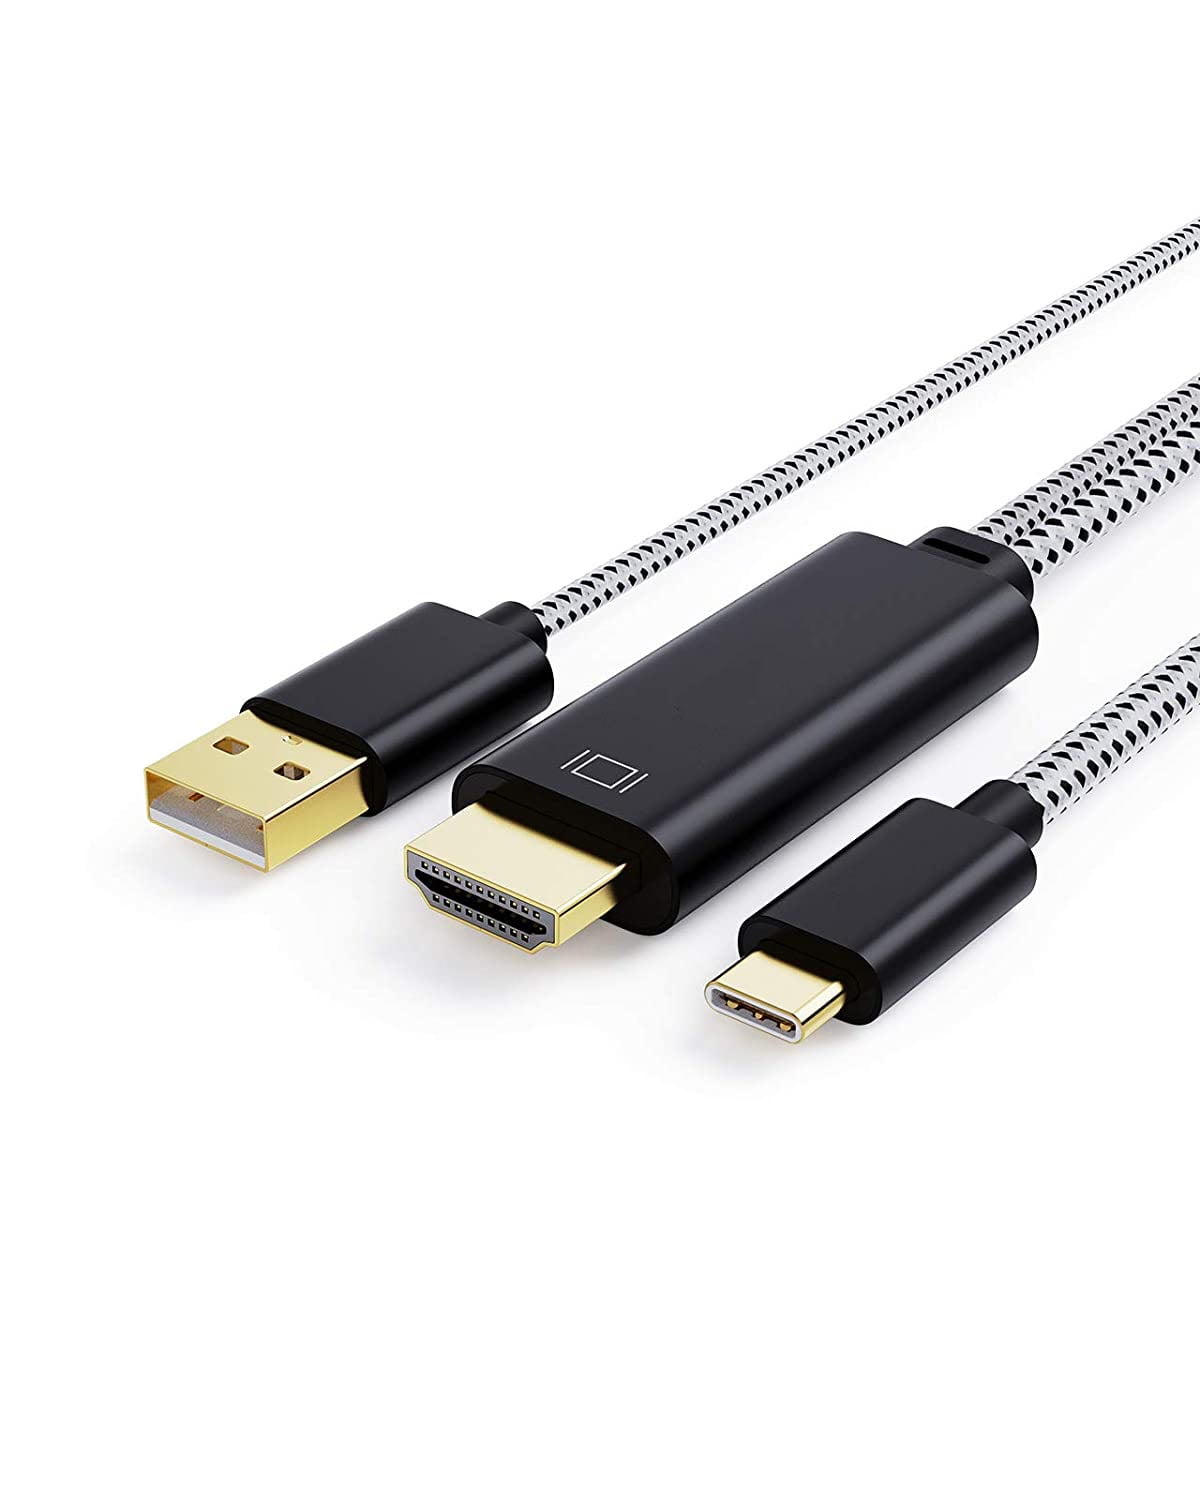 X-Lent USB C 3.1 GEN 2 Cable Type C to Type C Cable Thunderbolt 3 Compatible with 10Gbps and 100W Power Delivery and 4K@60Hz Video in Black 3.3ft 